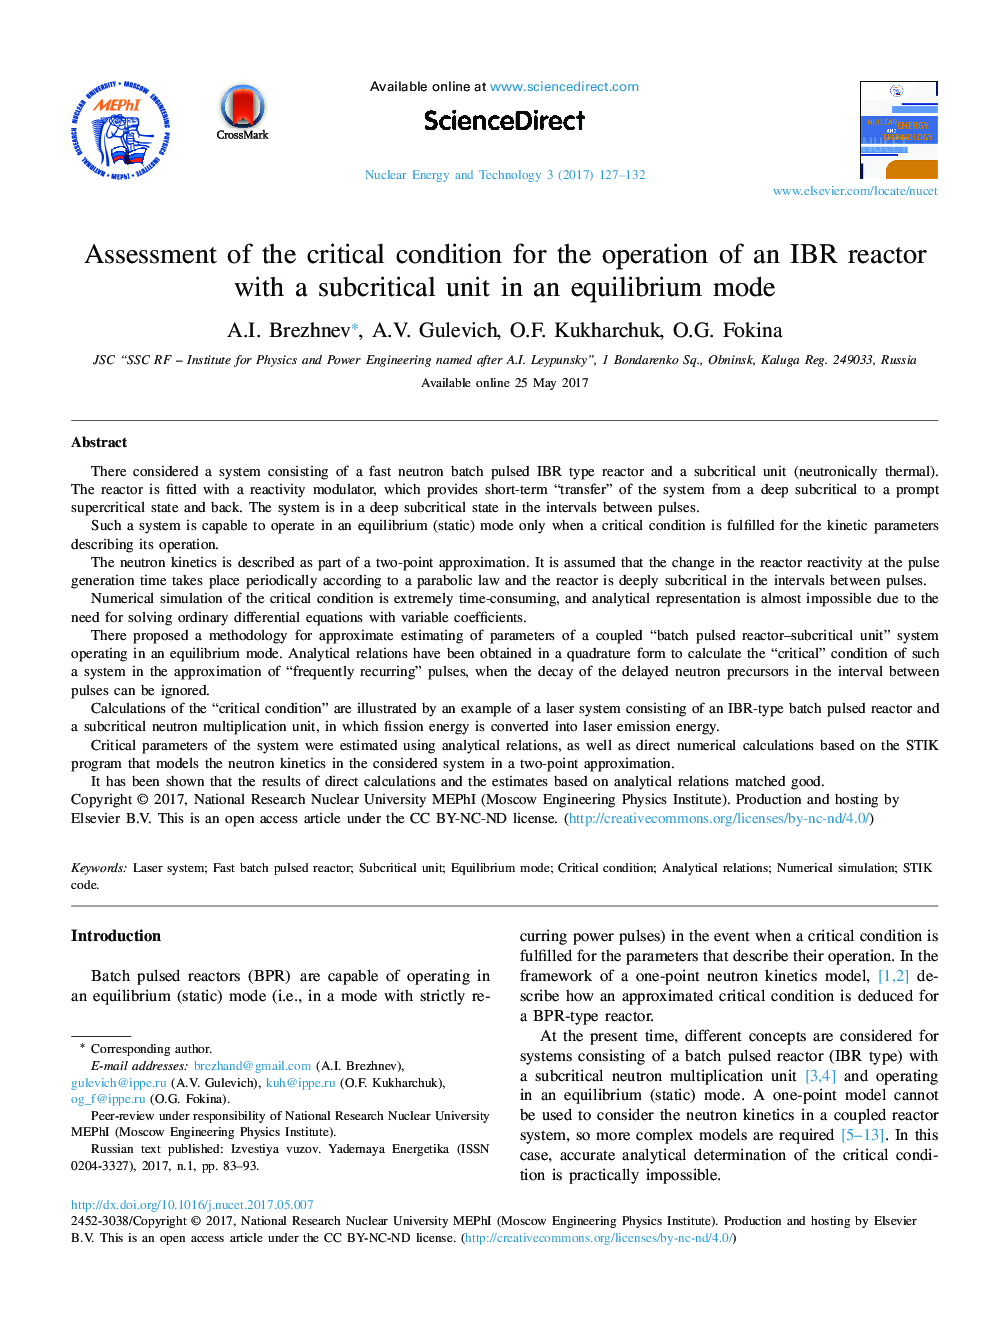 Assessment of the critical condition for the operation of an IBR reactor with a subcritical unit in an equilibrium mode